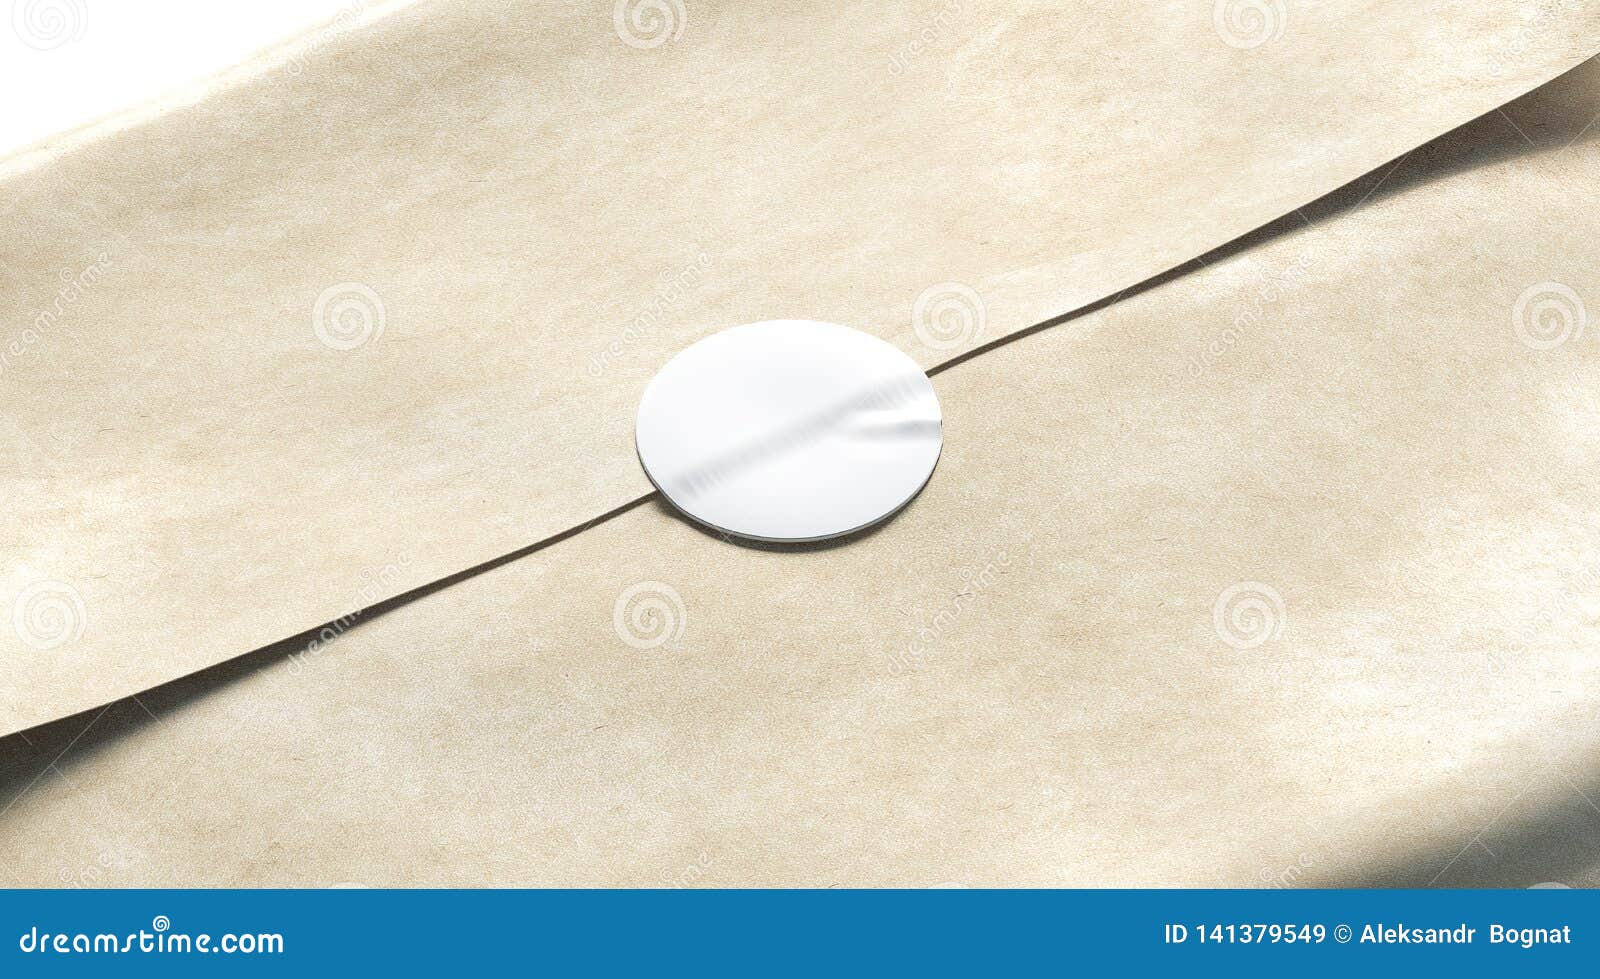 Download Blank White Adhesive Round Sticker On Craft Wrapping Paper Mockup Stock Image Image Of Pack Premiss 141379549